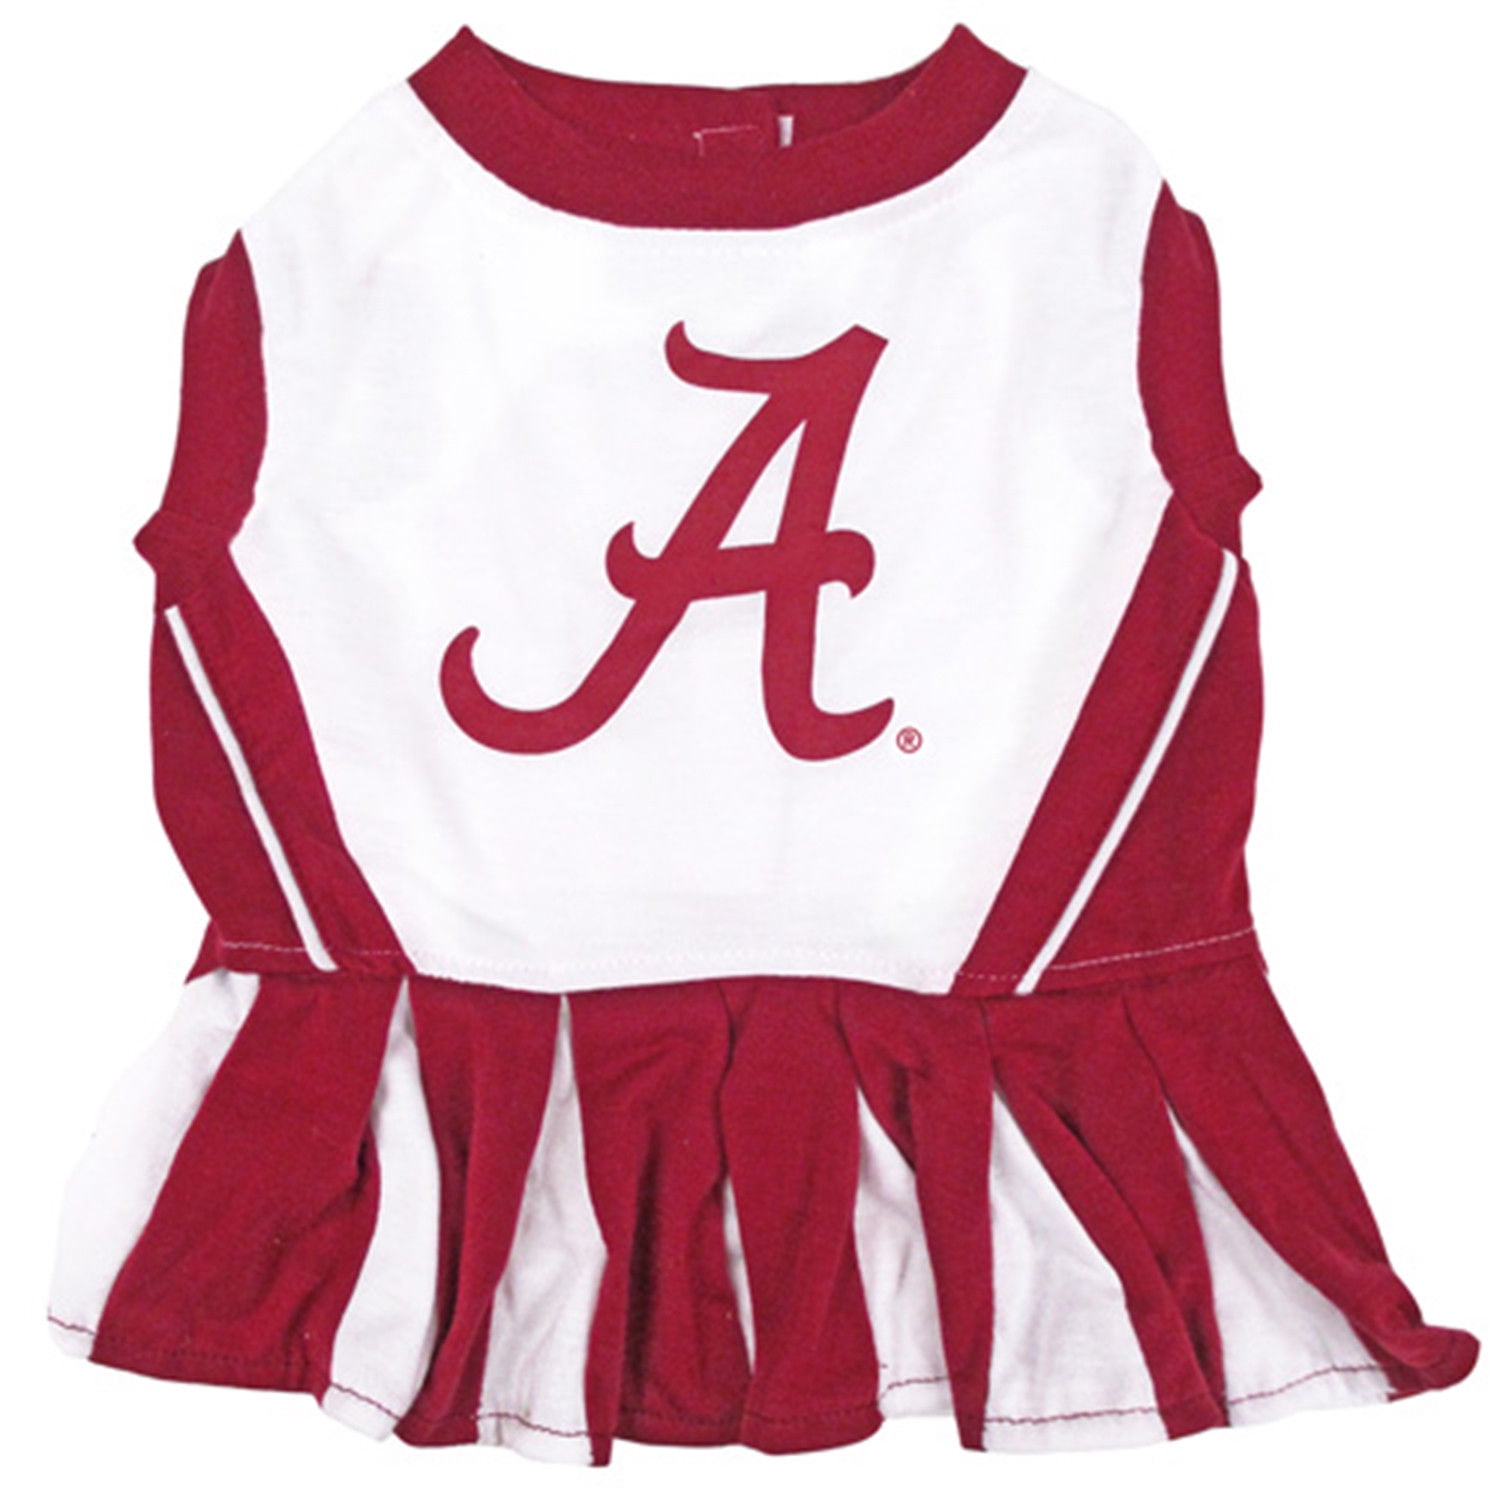 ALABAMA CRIMSON TIDE ★ CHEERLEADER DOG DRESS OUTFIT ★ ALL SIZES ★ LICENSED NCAA 